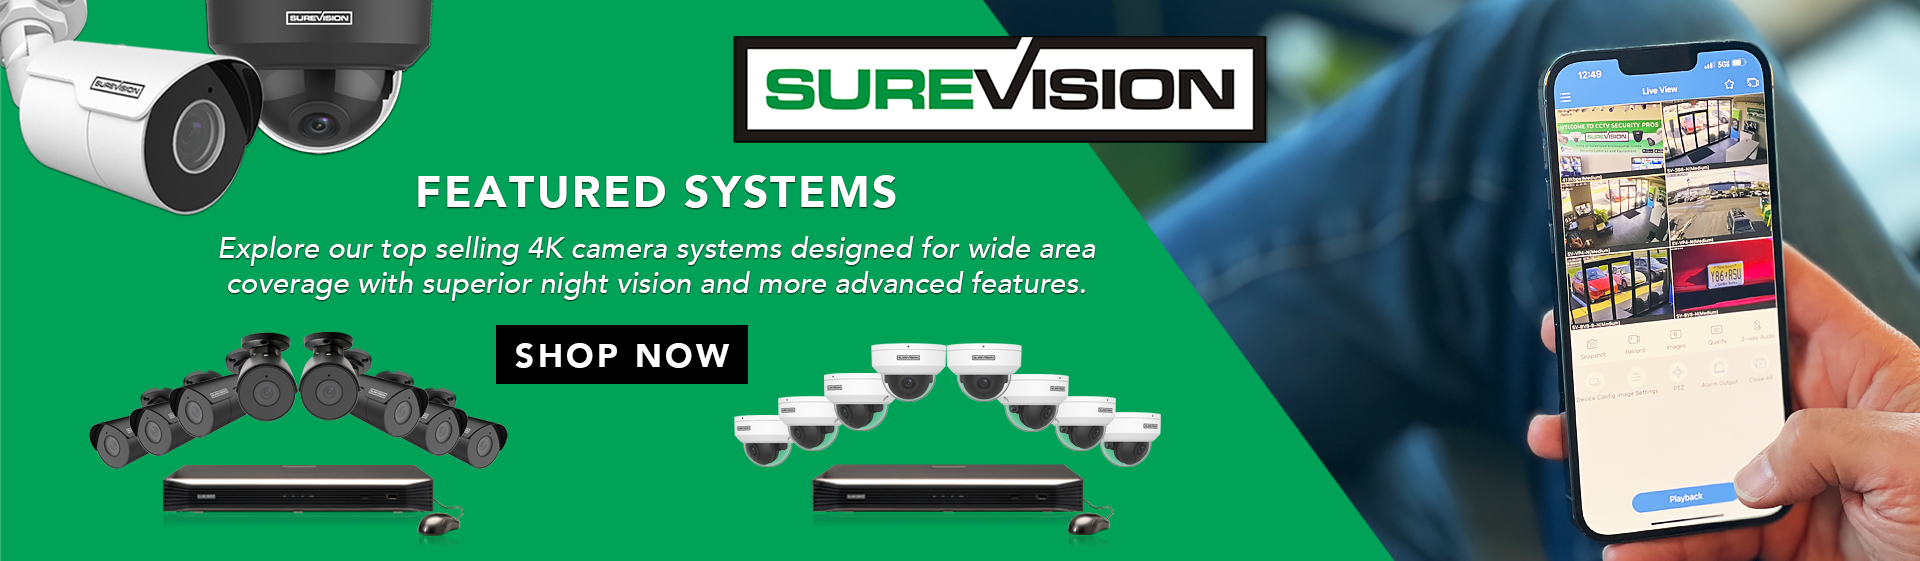 https://www.cctvsecuritypros.com/featured-security-camera-system